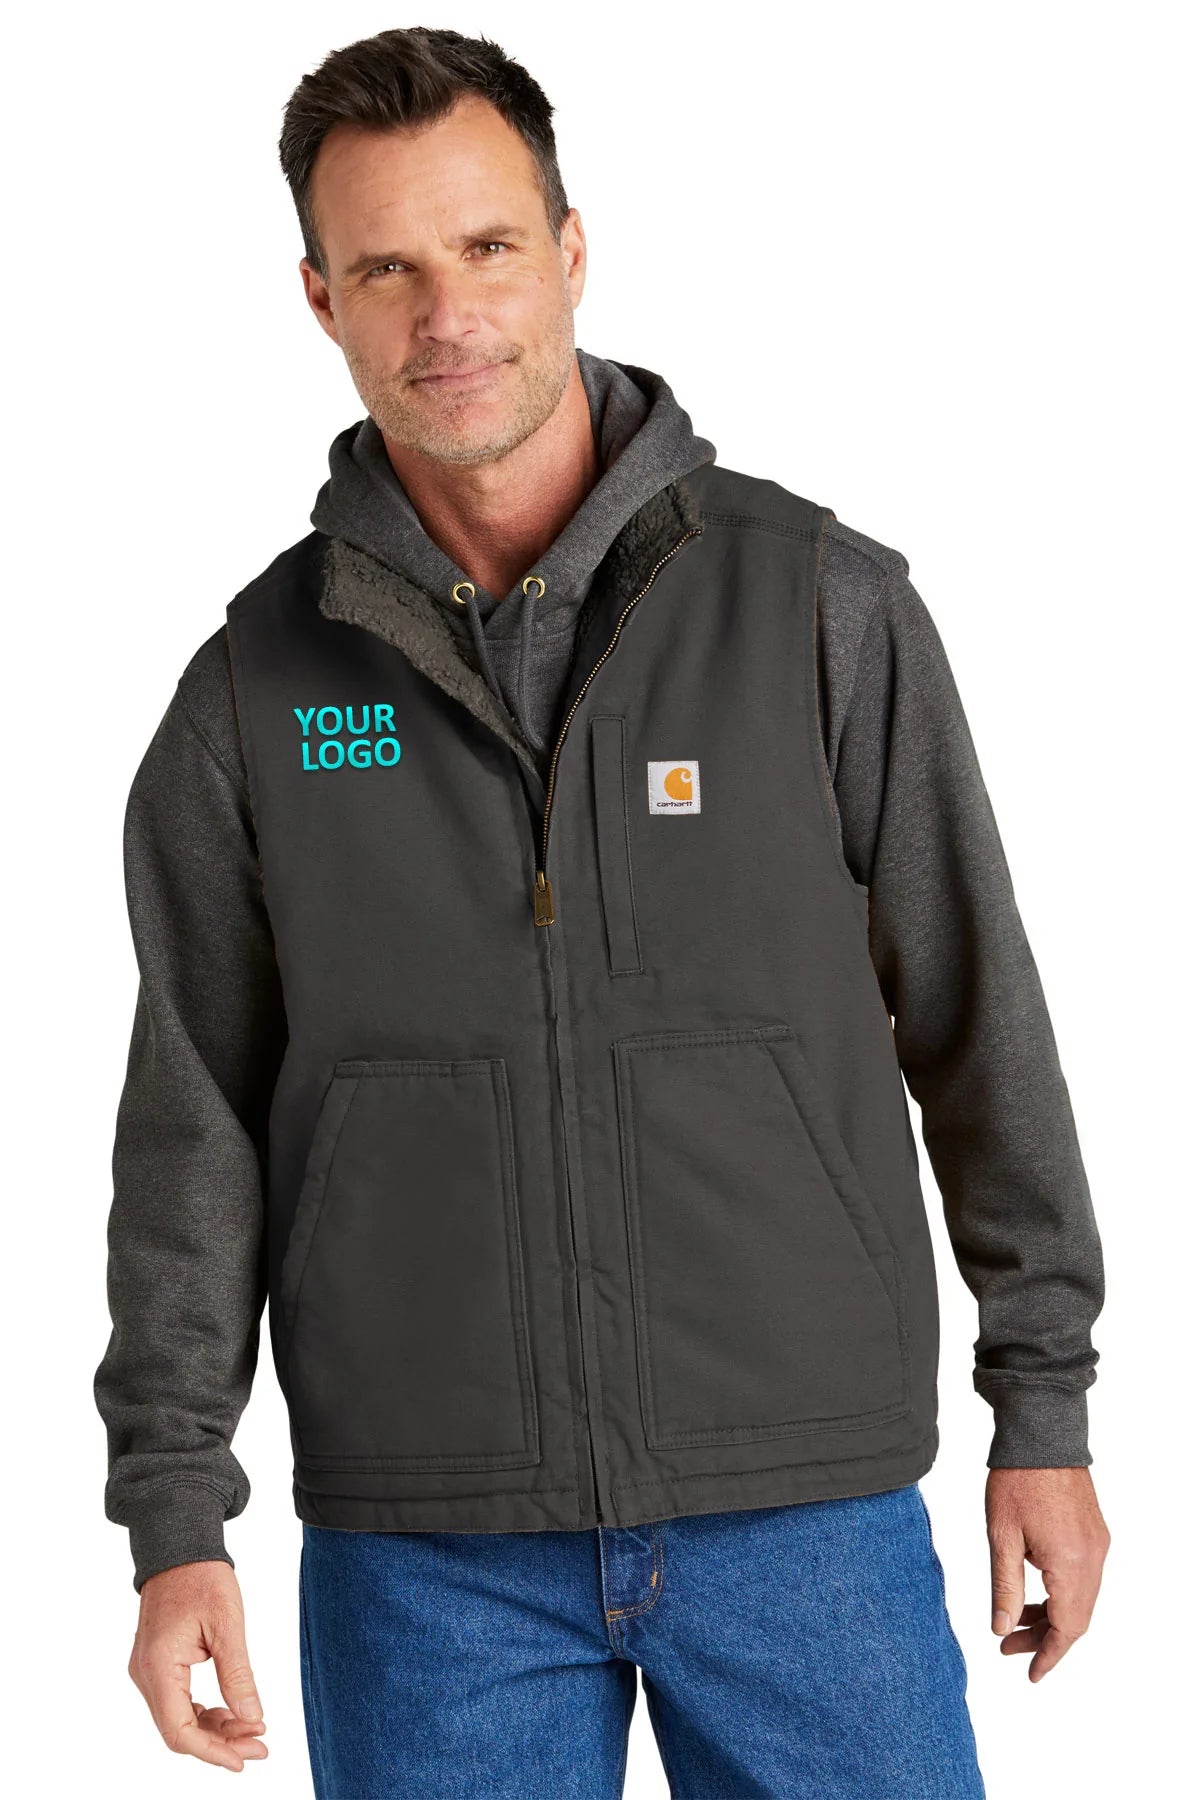 Carhartt CT104277 S Gravel CT104277 business jackets with logo